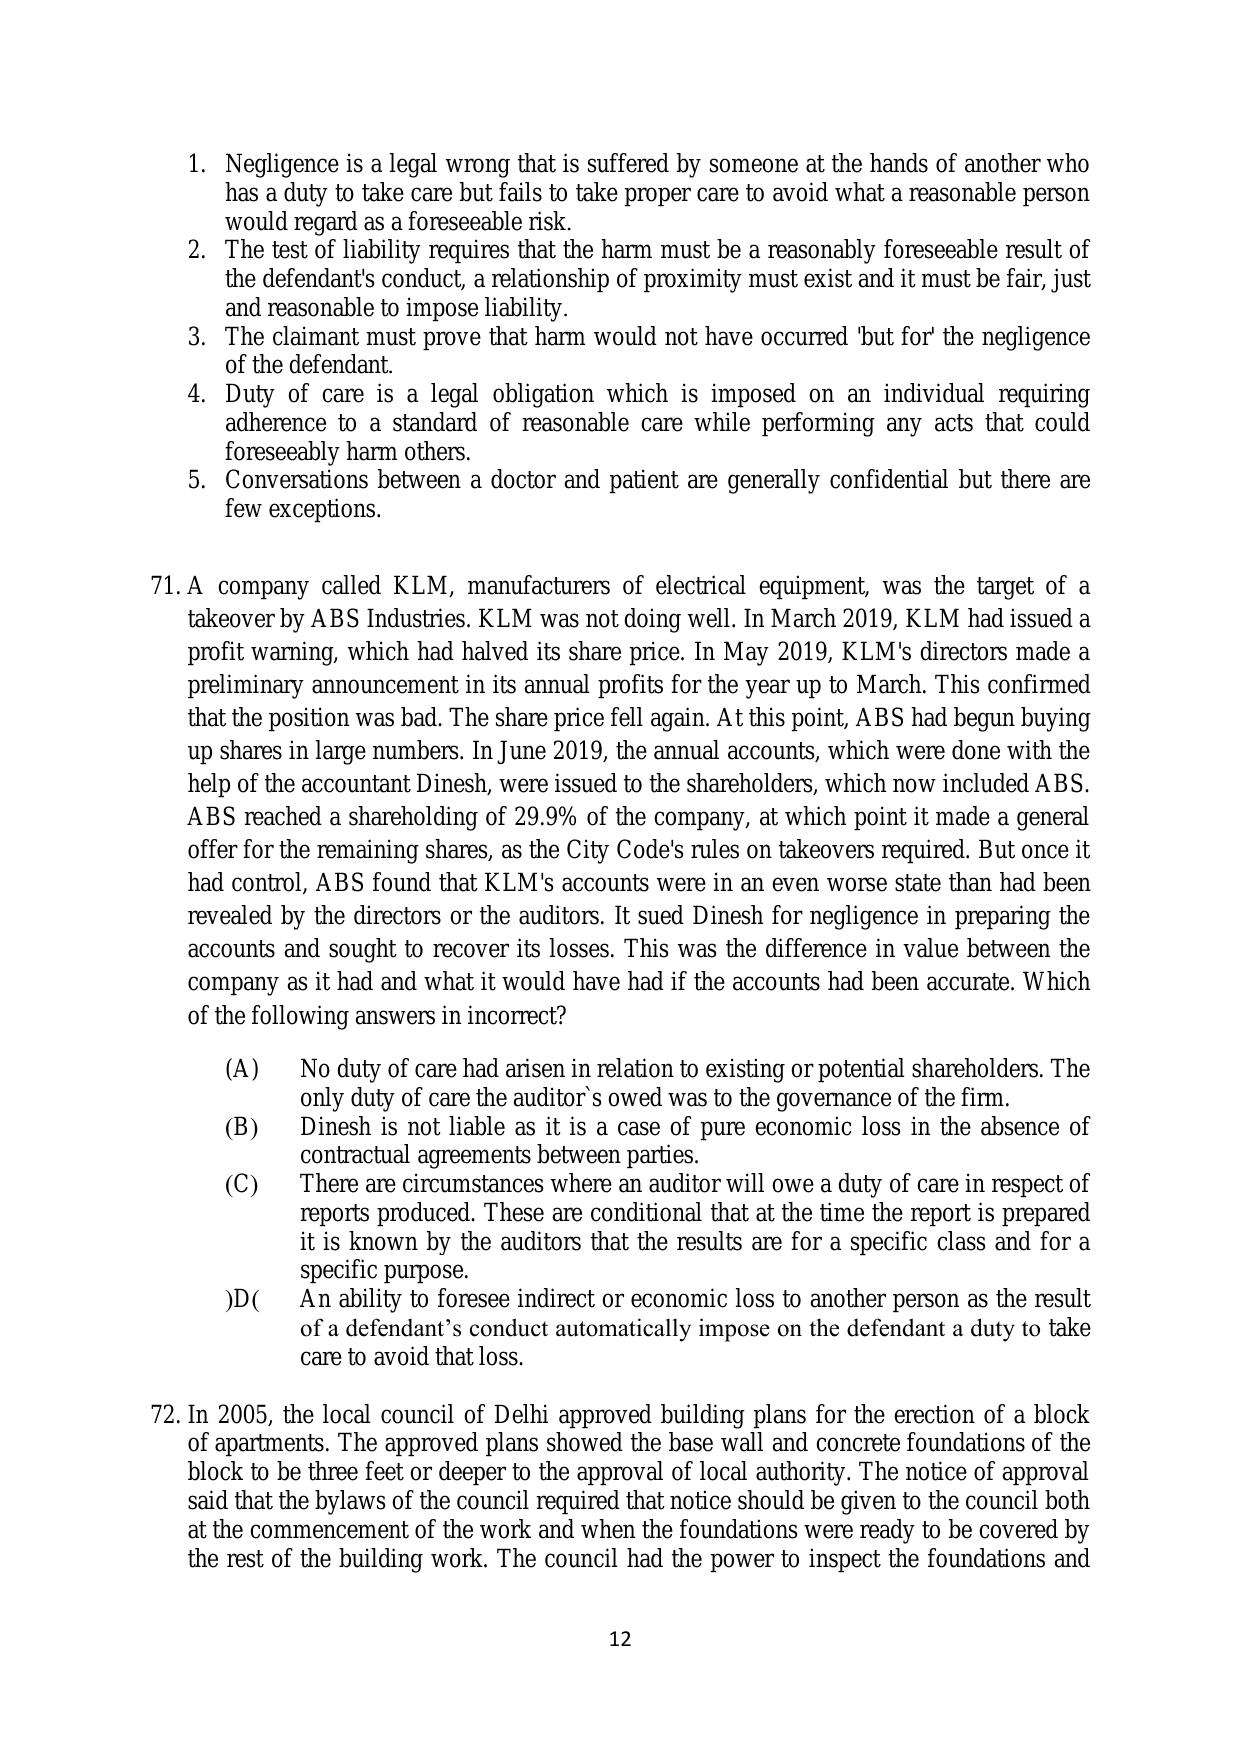 AILET 2020 Question Paper for BA LLB - Page 12